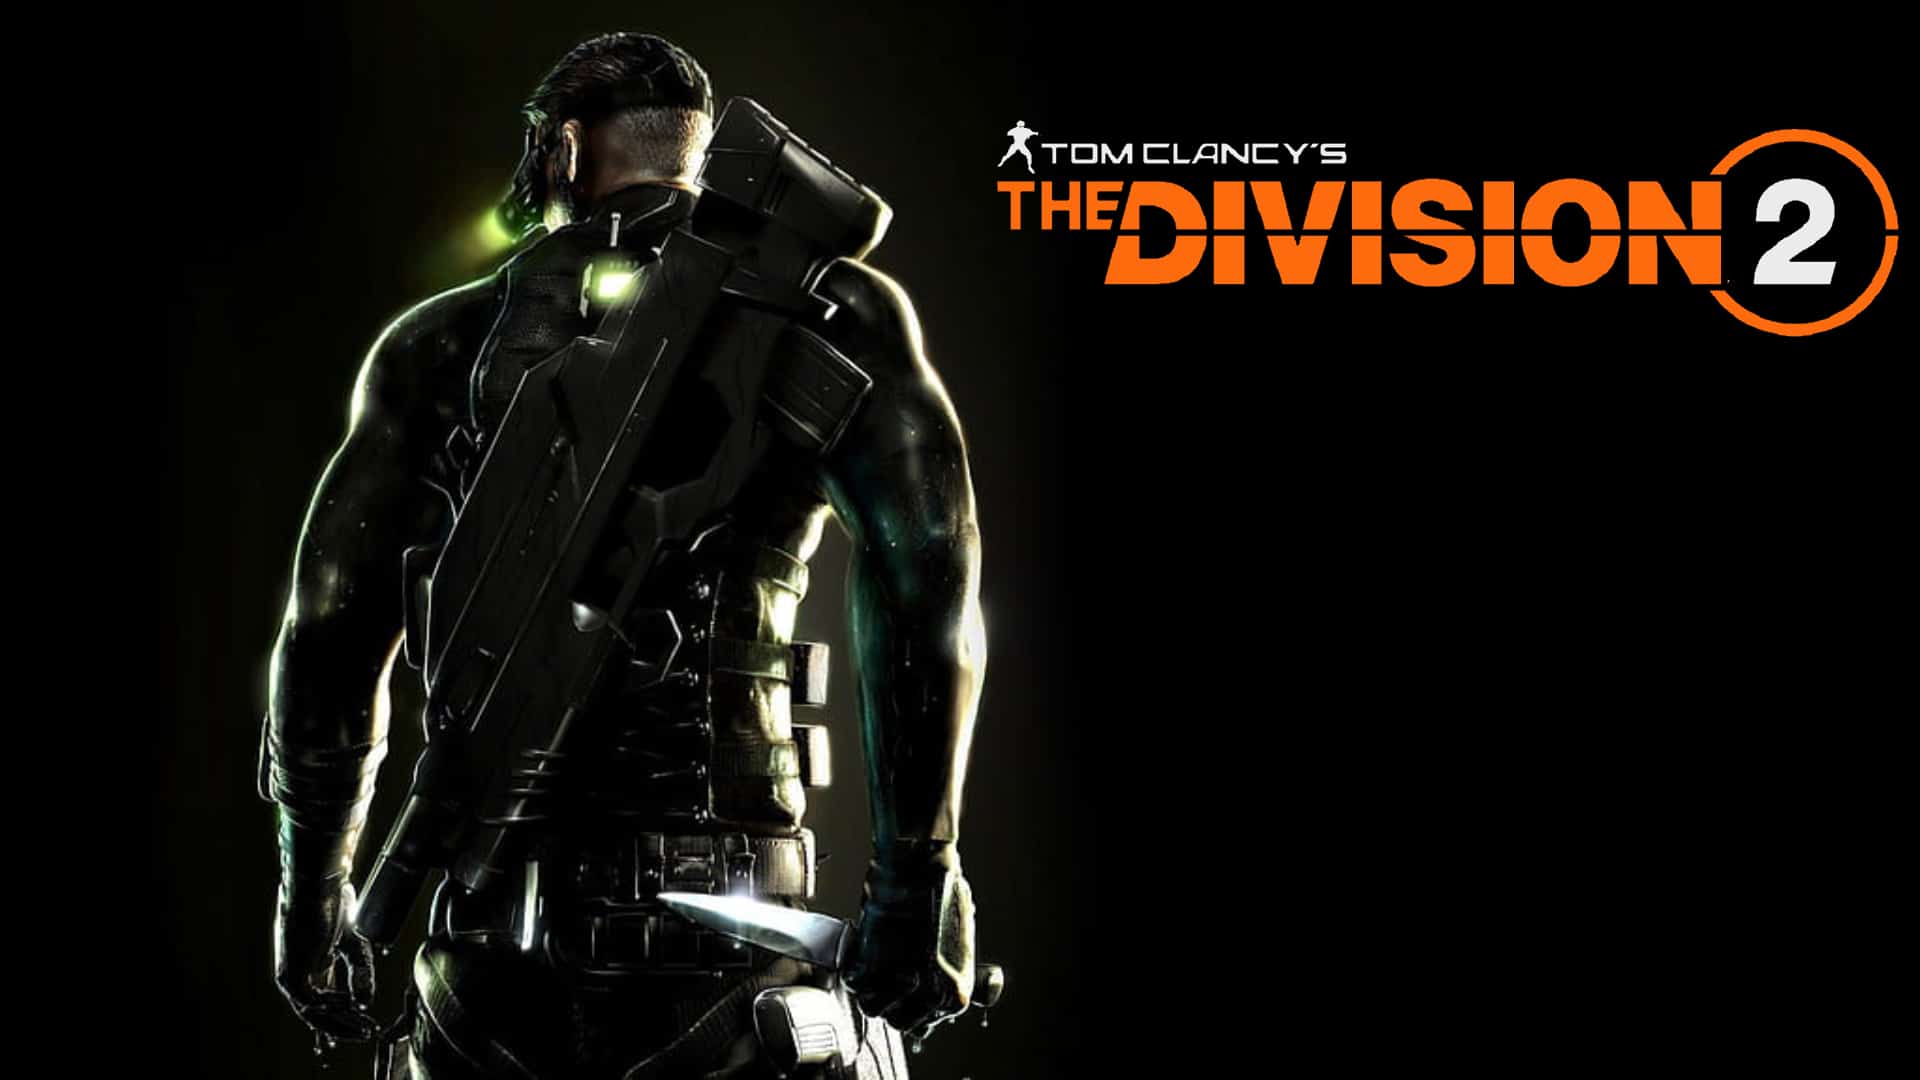 Splinter Cell Remake team teases early concept art of the game